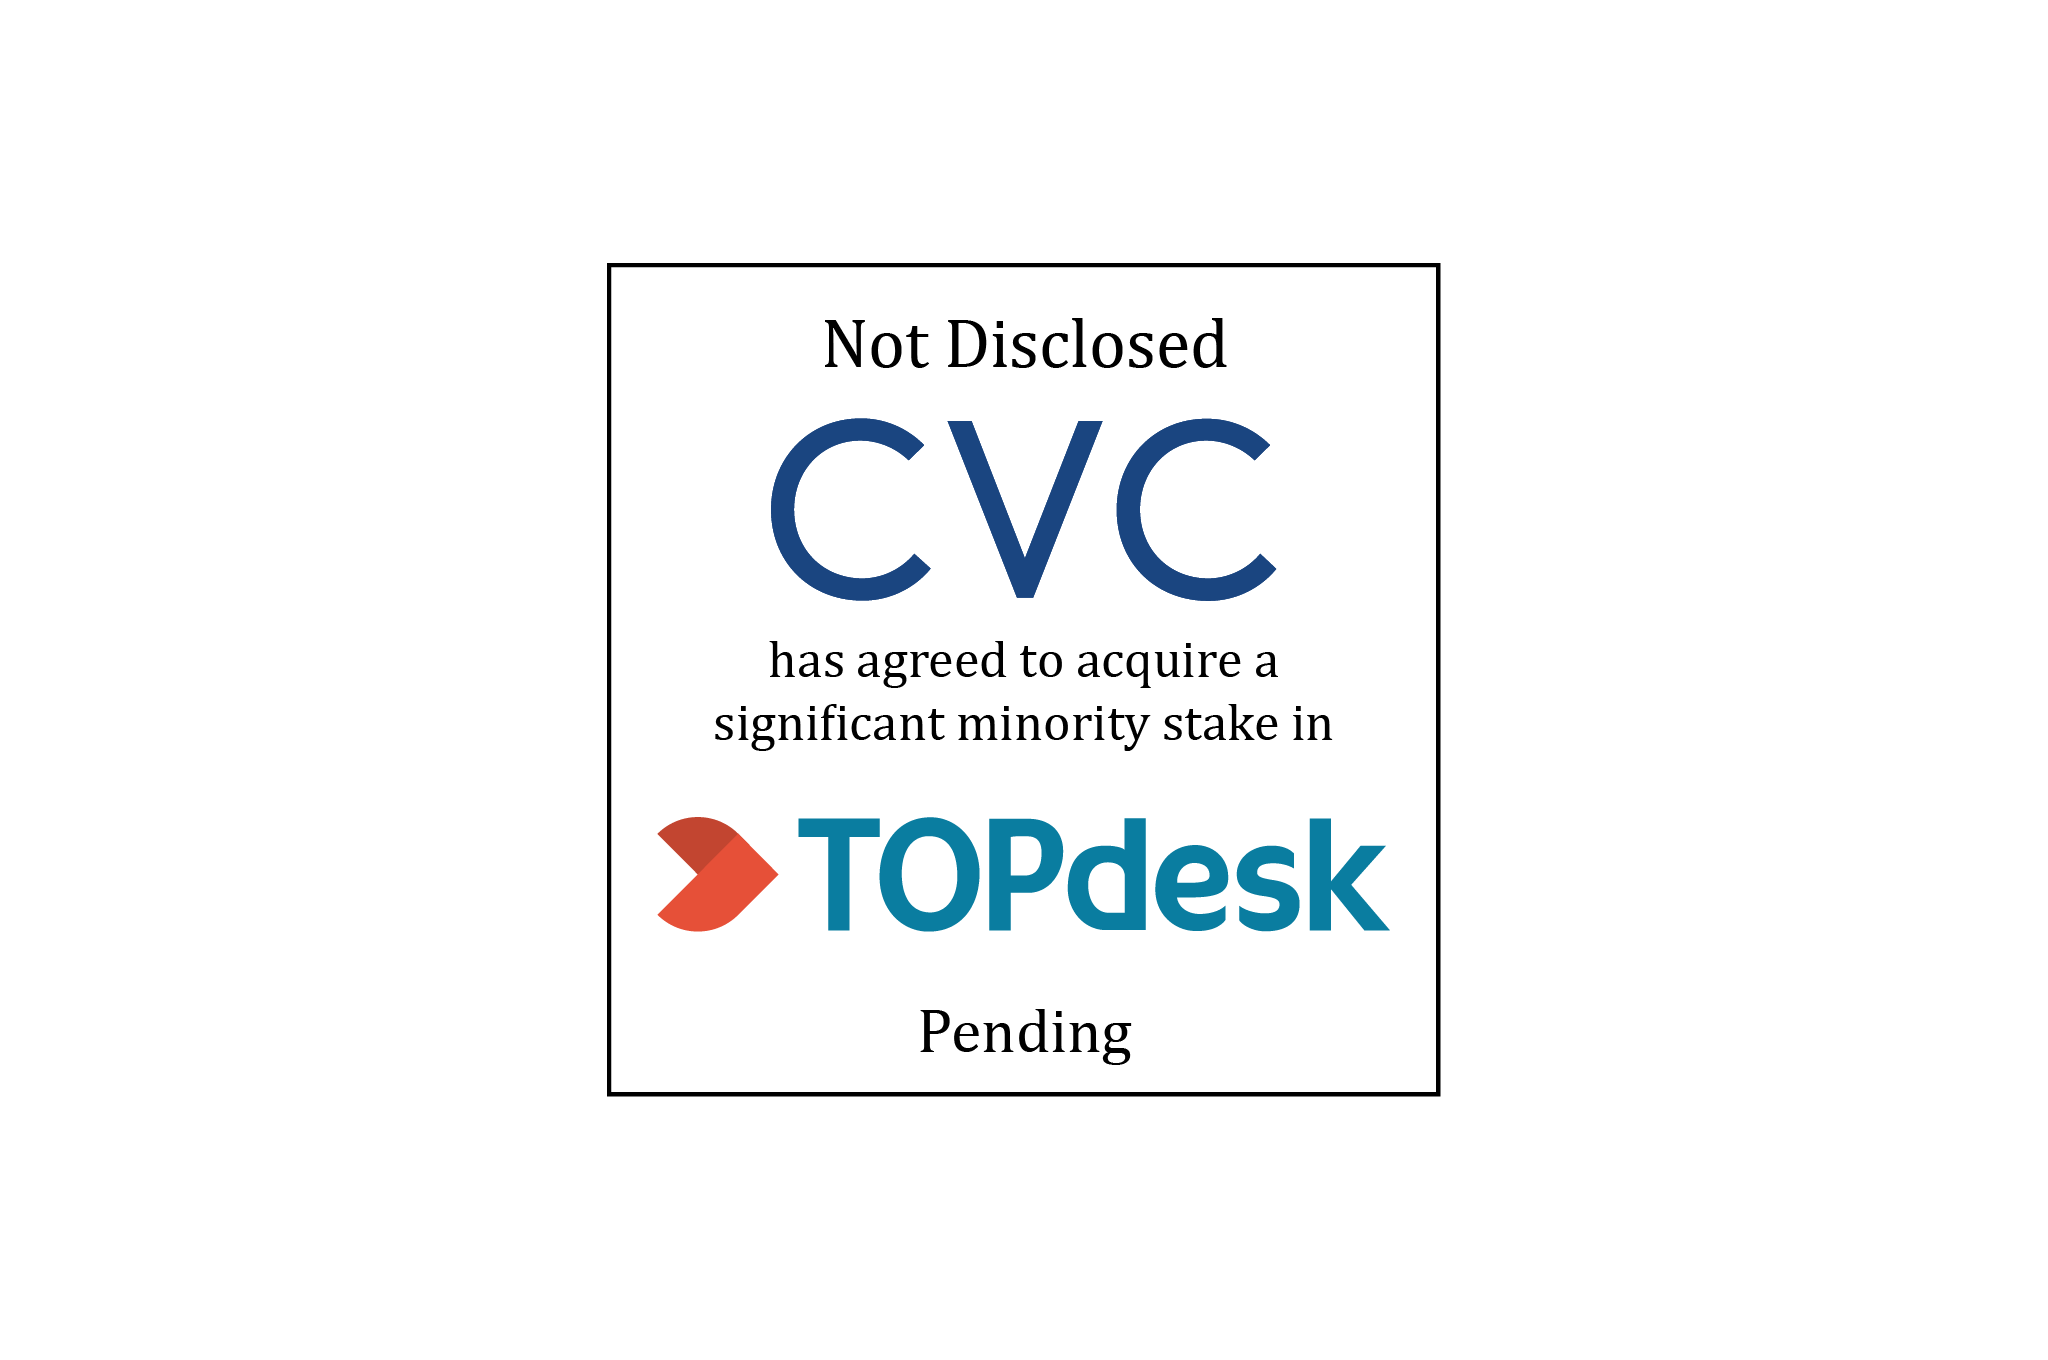 Not Disclosed | CVC (logo) has agreed to acquire a significant minority stake in Topdesk (logo) | Pending